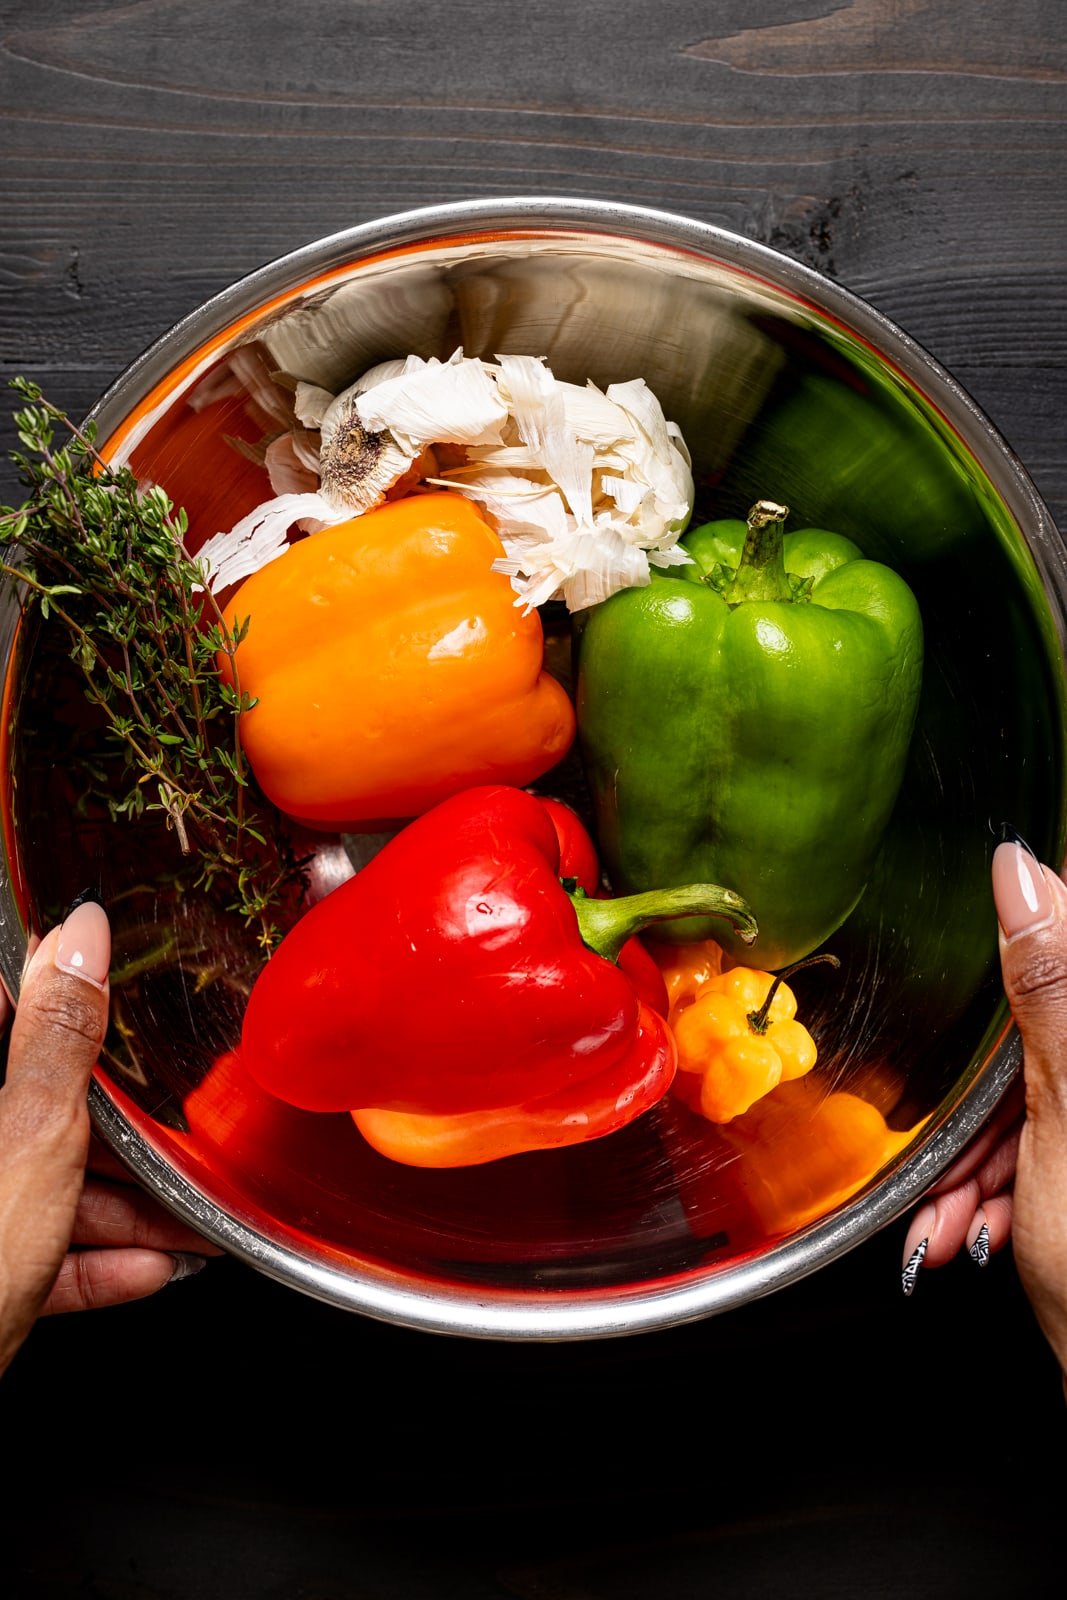 Silver bowl being held full of bell peppers, garlic, thyme, and peppers.